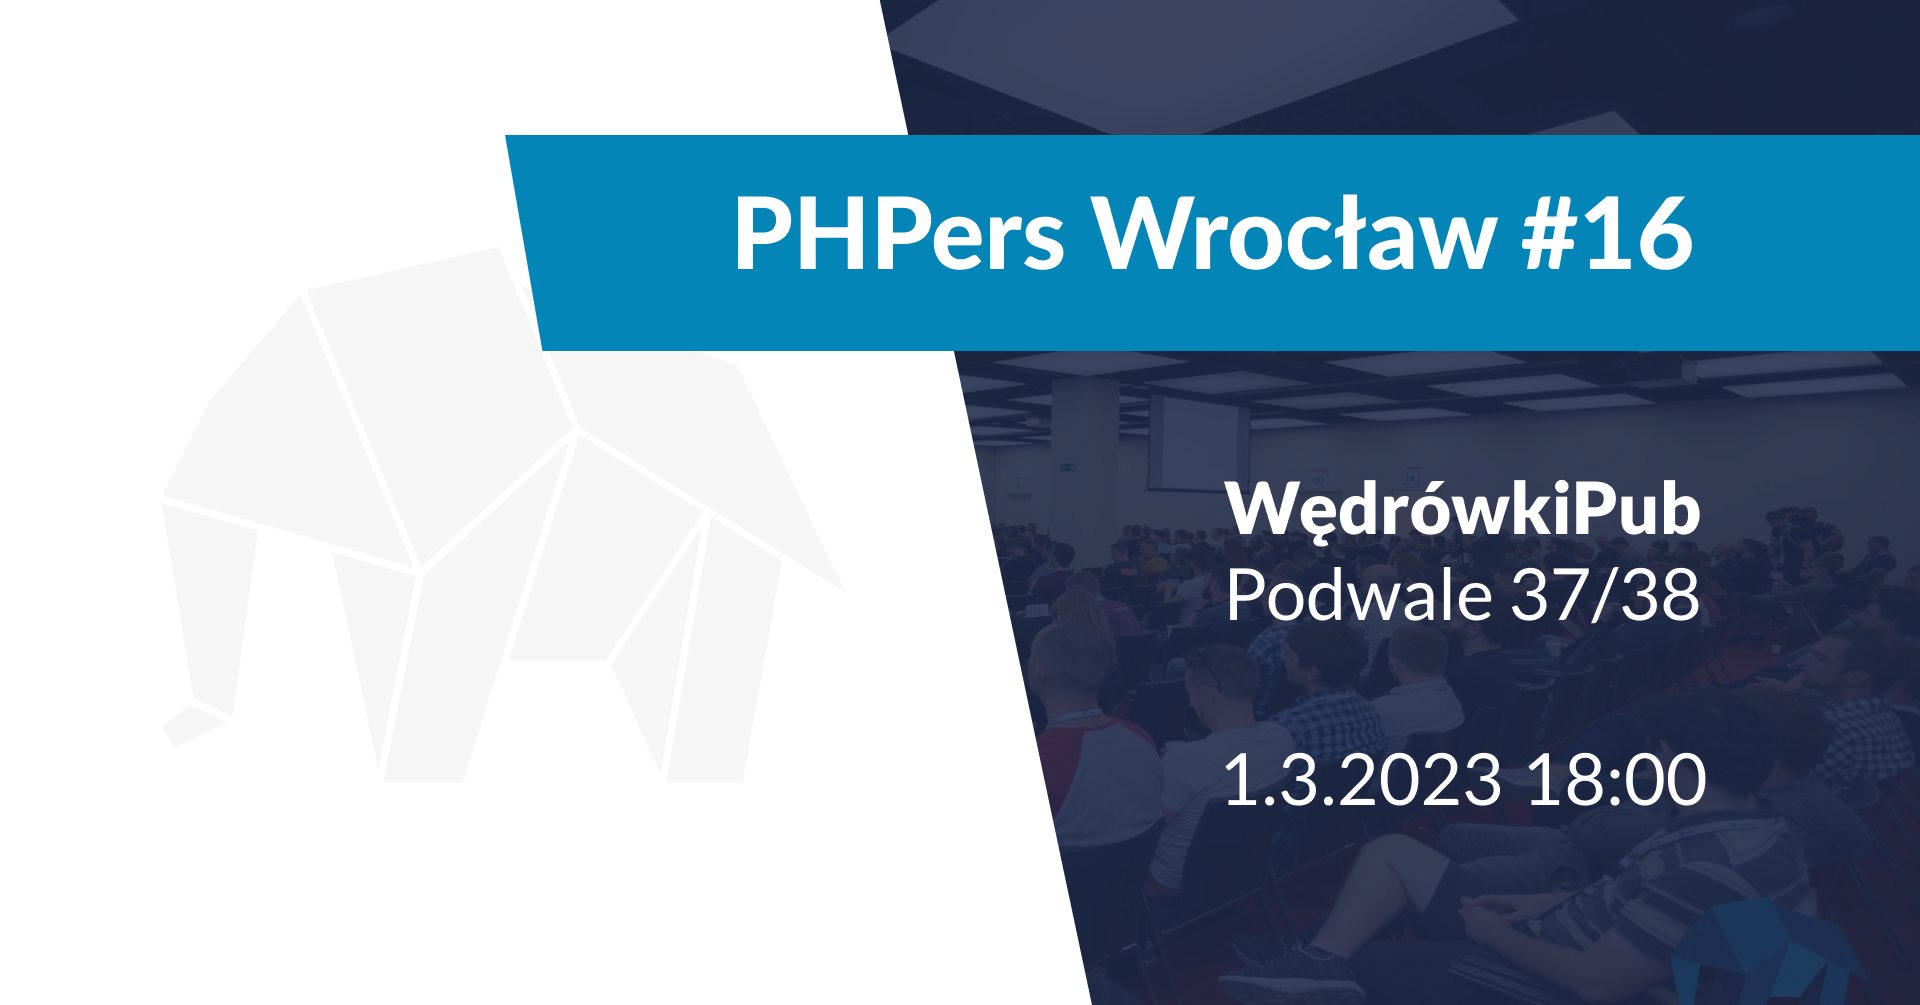 phpers-wroclaw-16